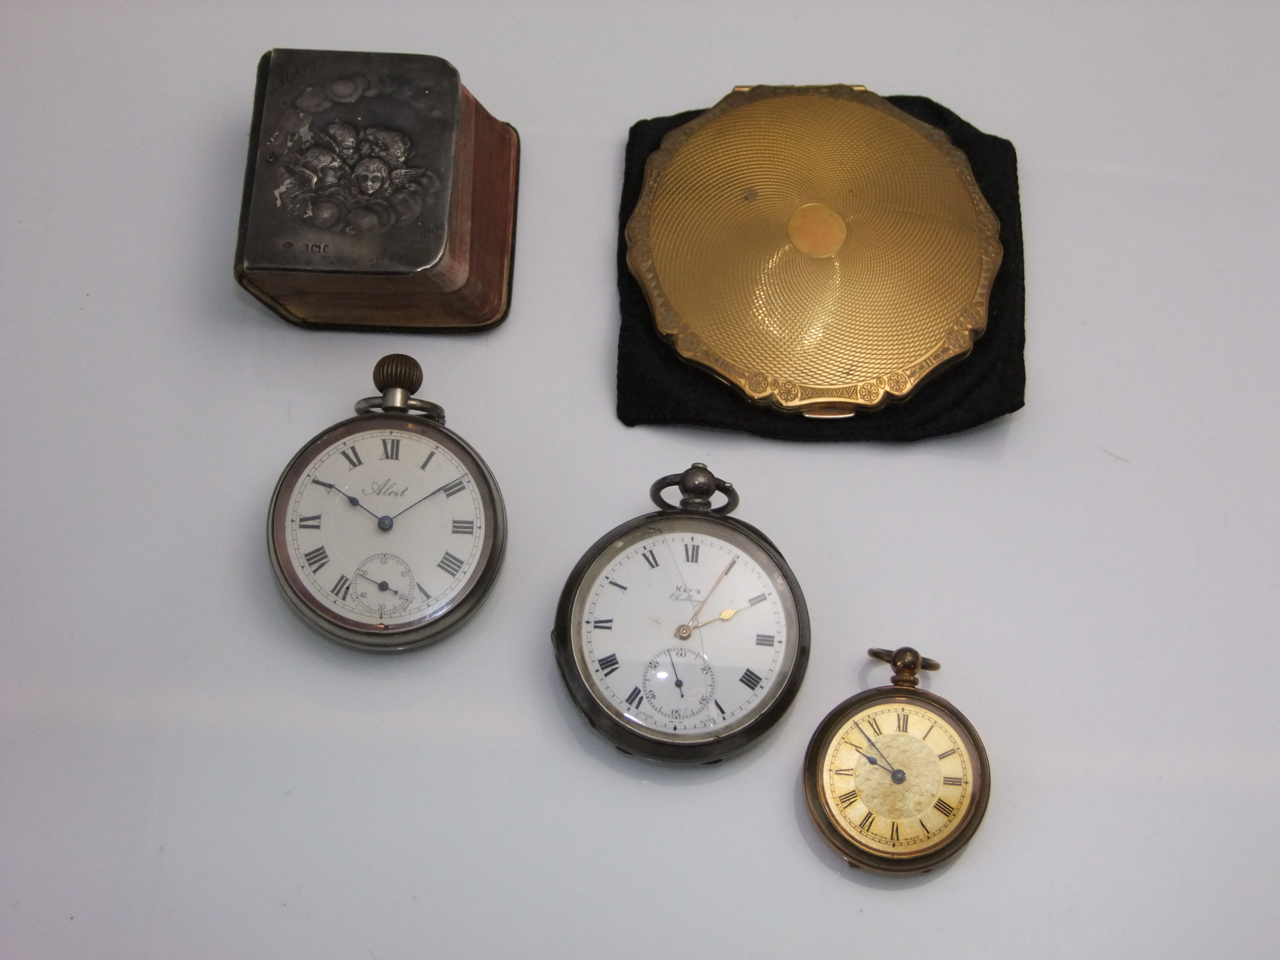 A silver open-faced pocket watch, Kay's Challenge, the white enamelled dial with black Roman